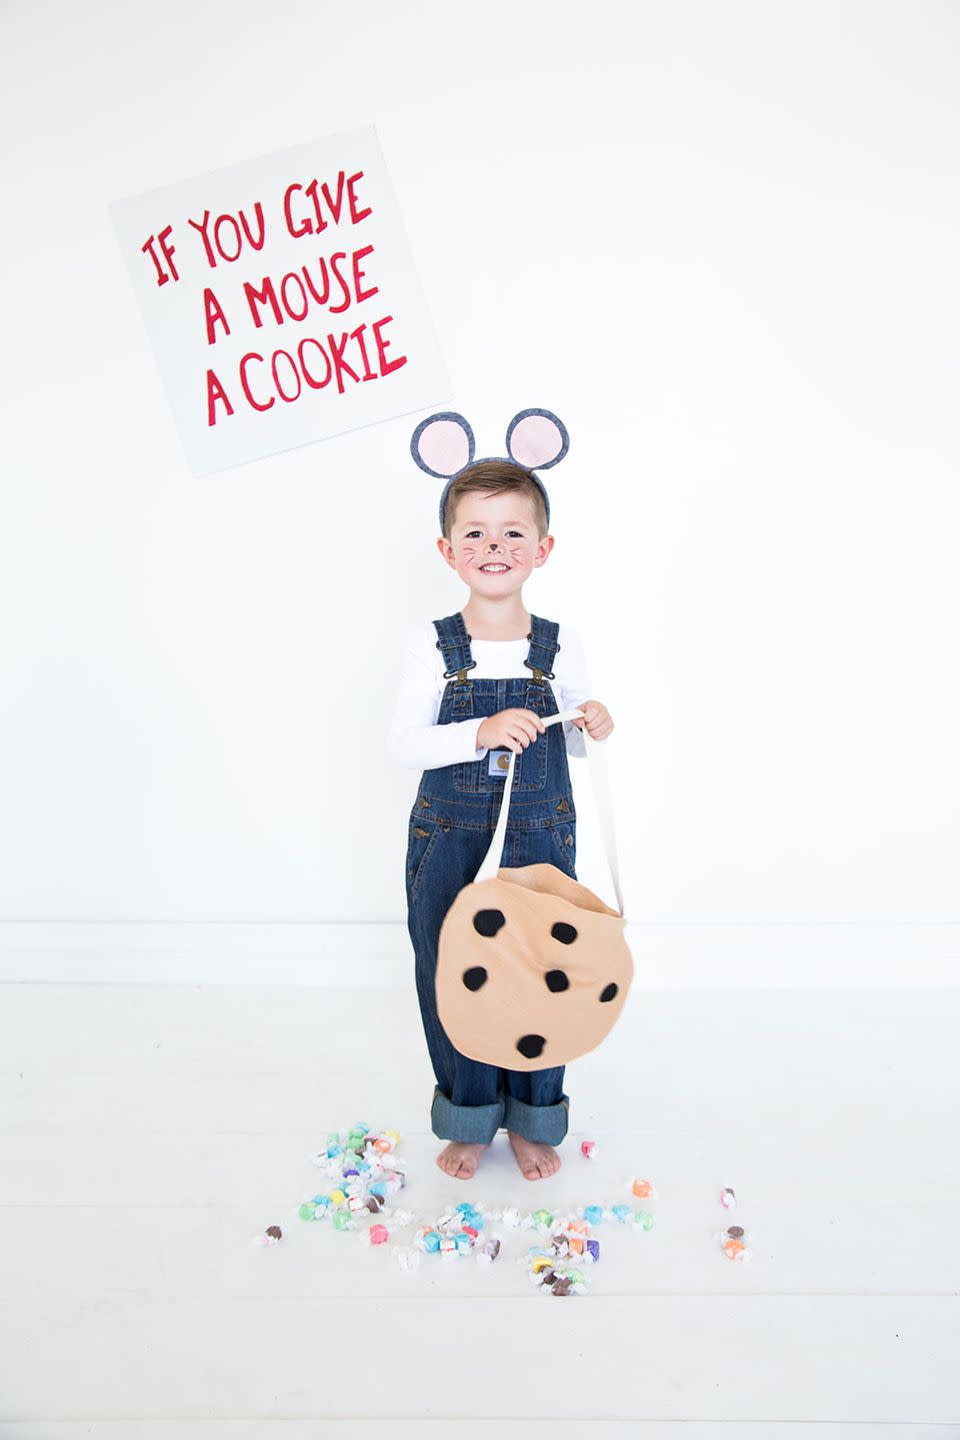 halloween costumes for kids if you give a mouse a cookie